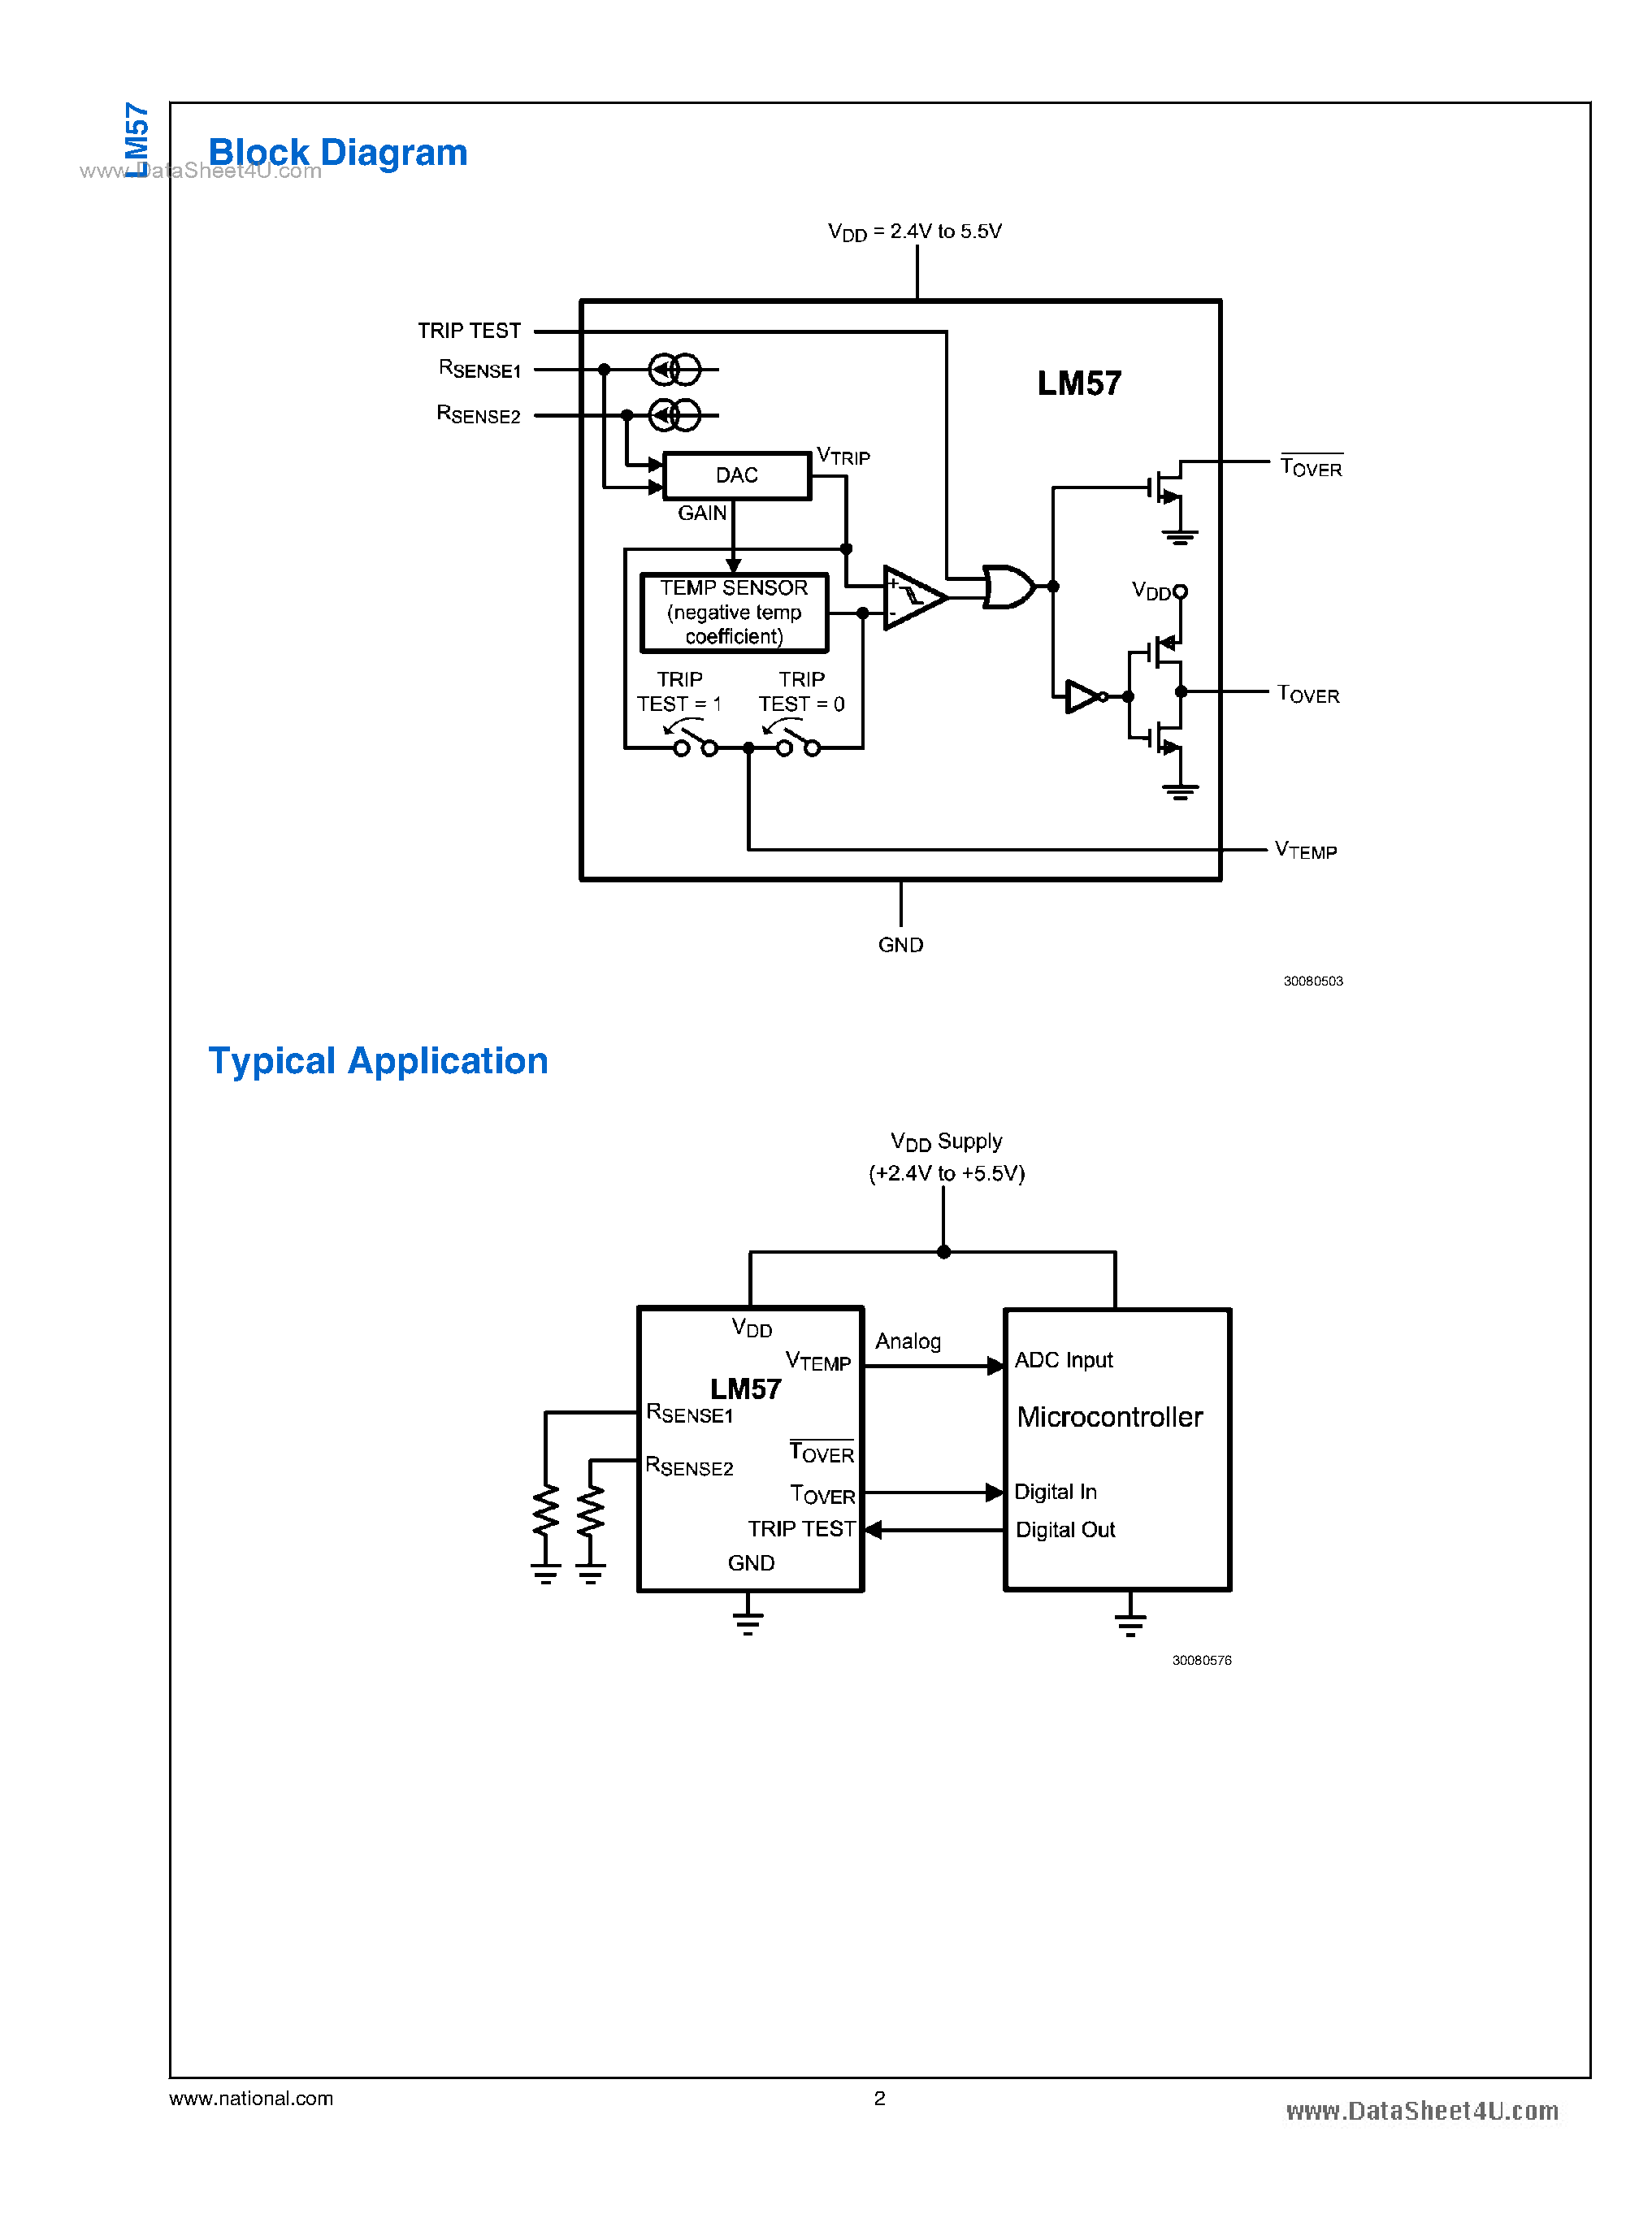 Даташит LM57 - Resistor-Programmable Temperature Switch And Analog Temperature Sensor страница 2